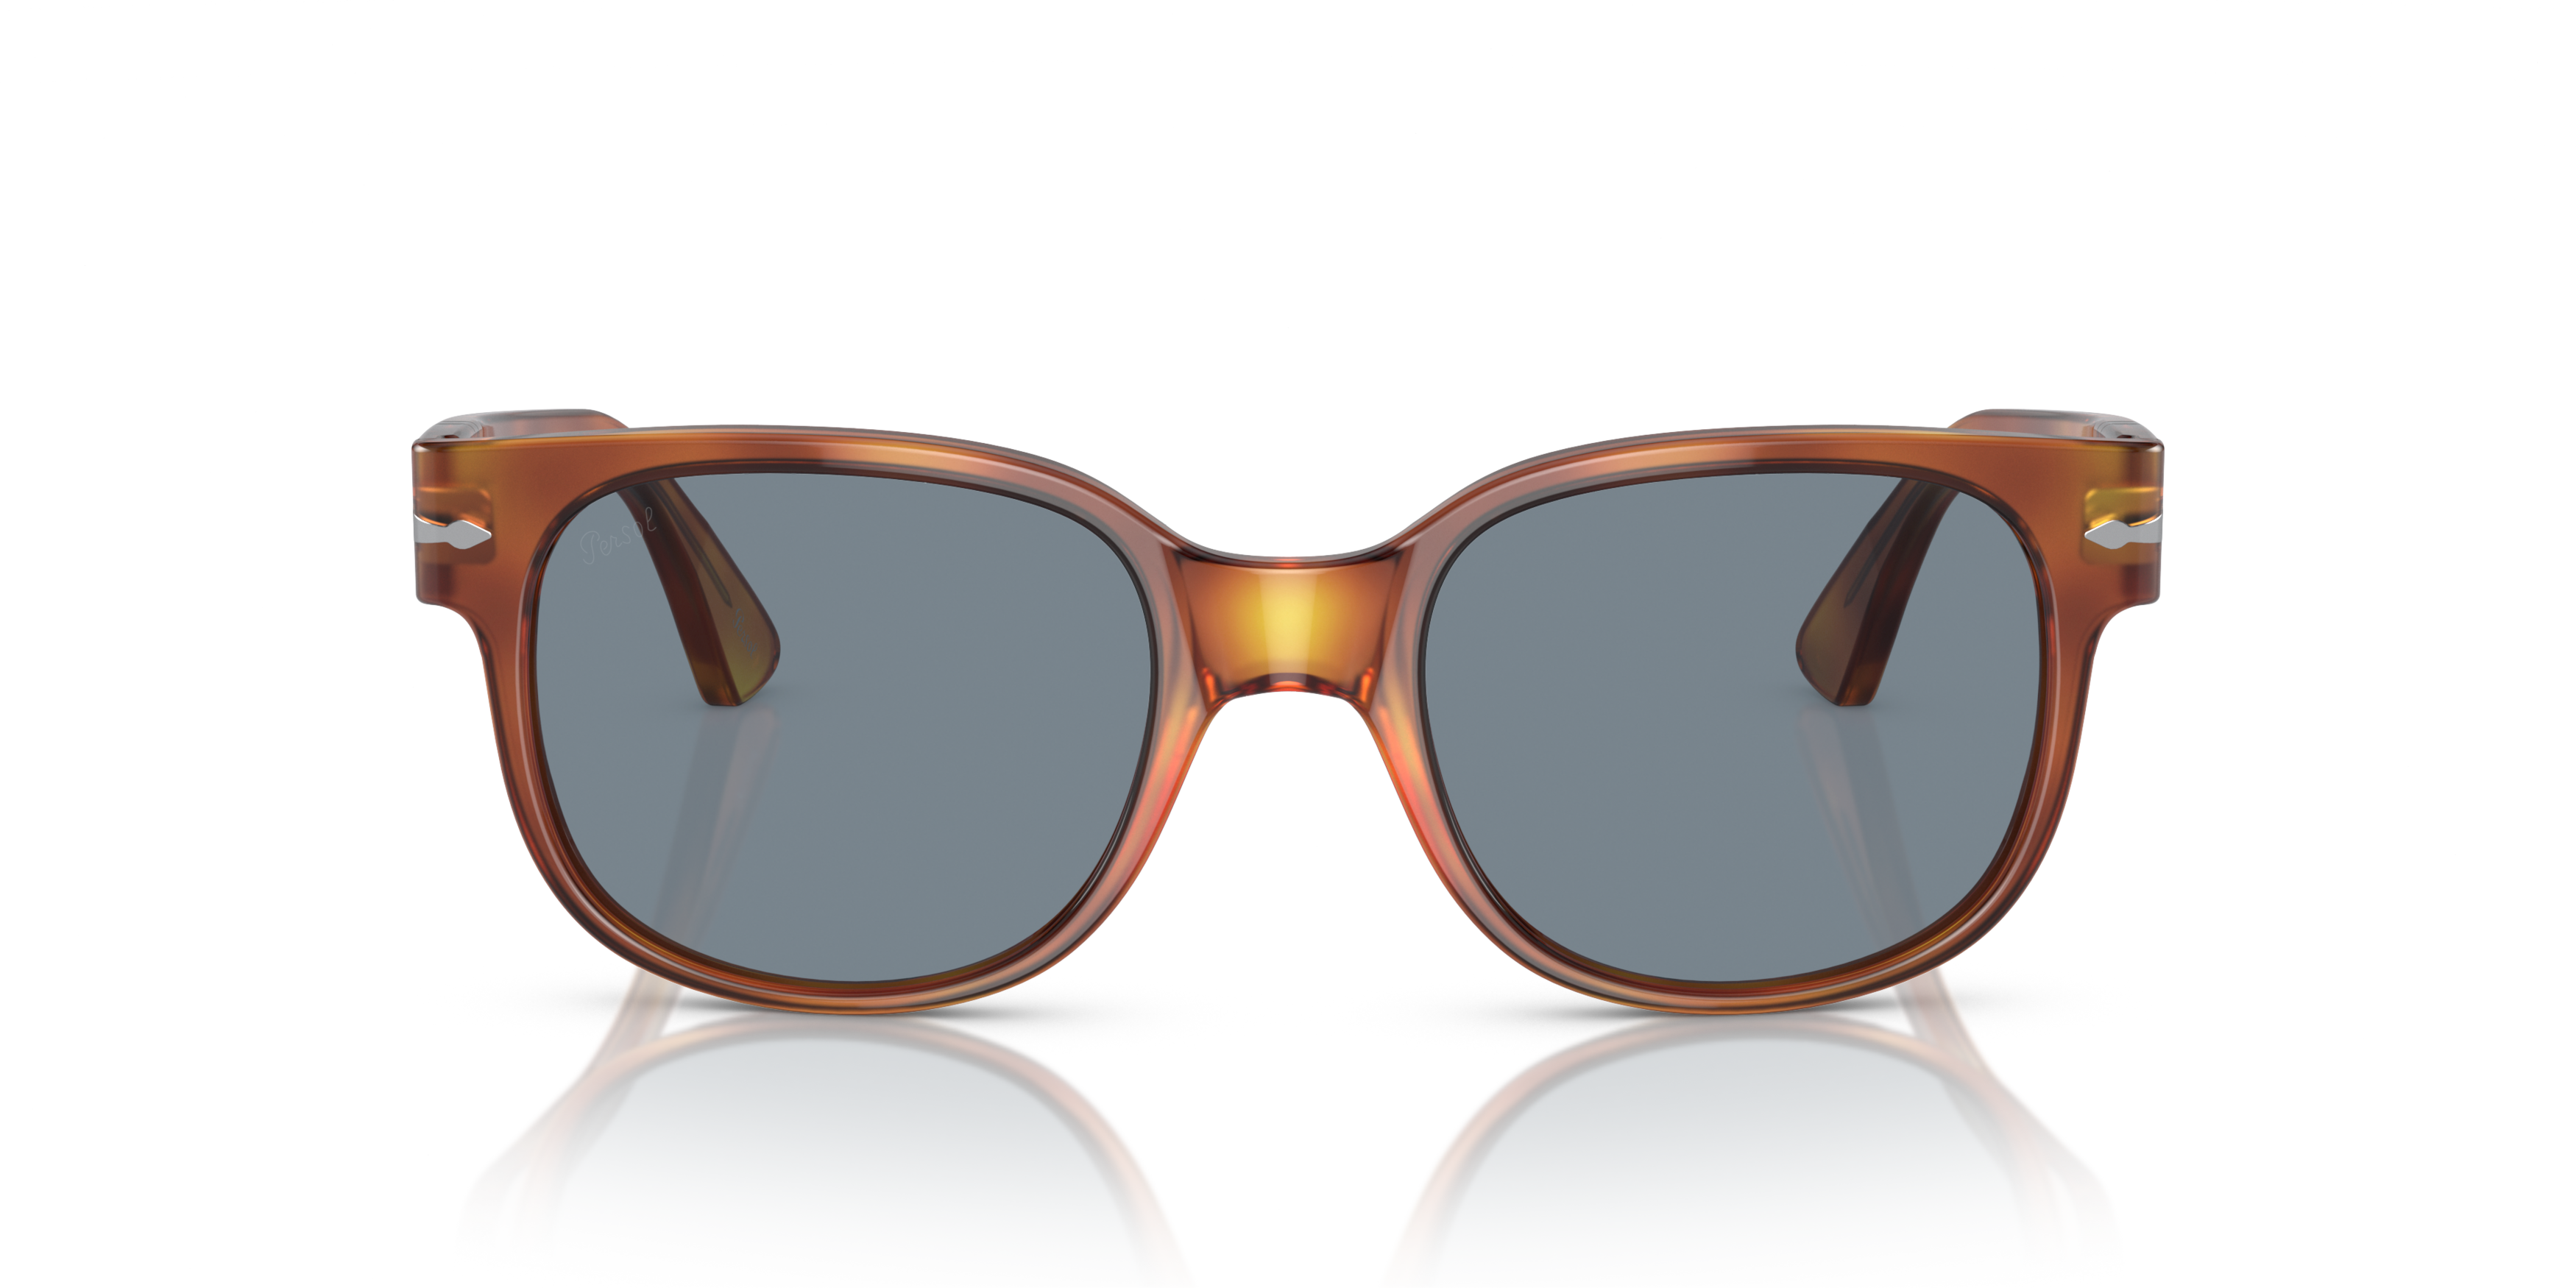 [products.image.front] Persol 0PO3257S 96/56